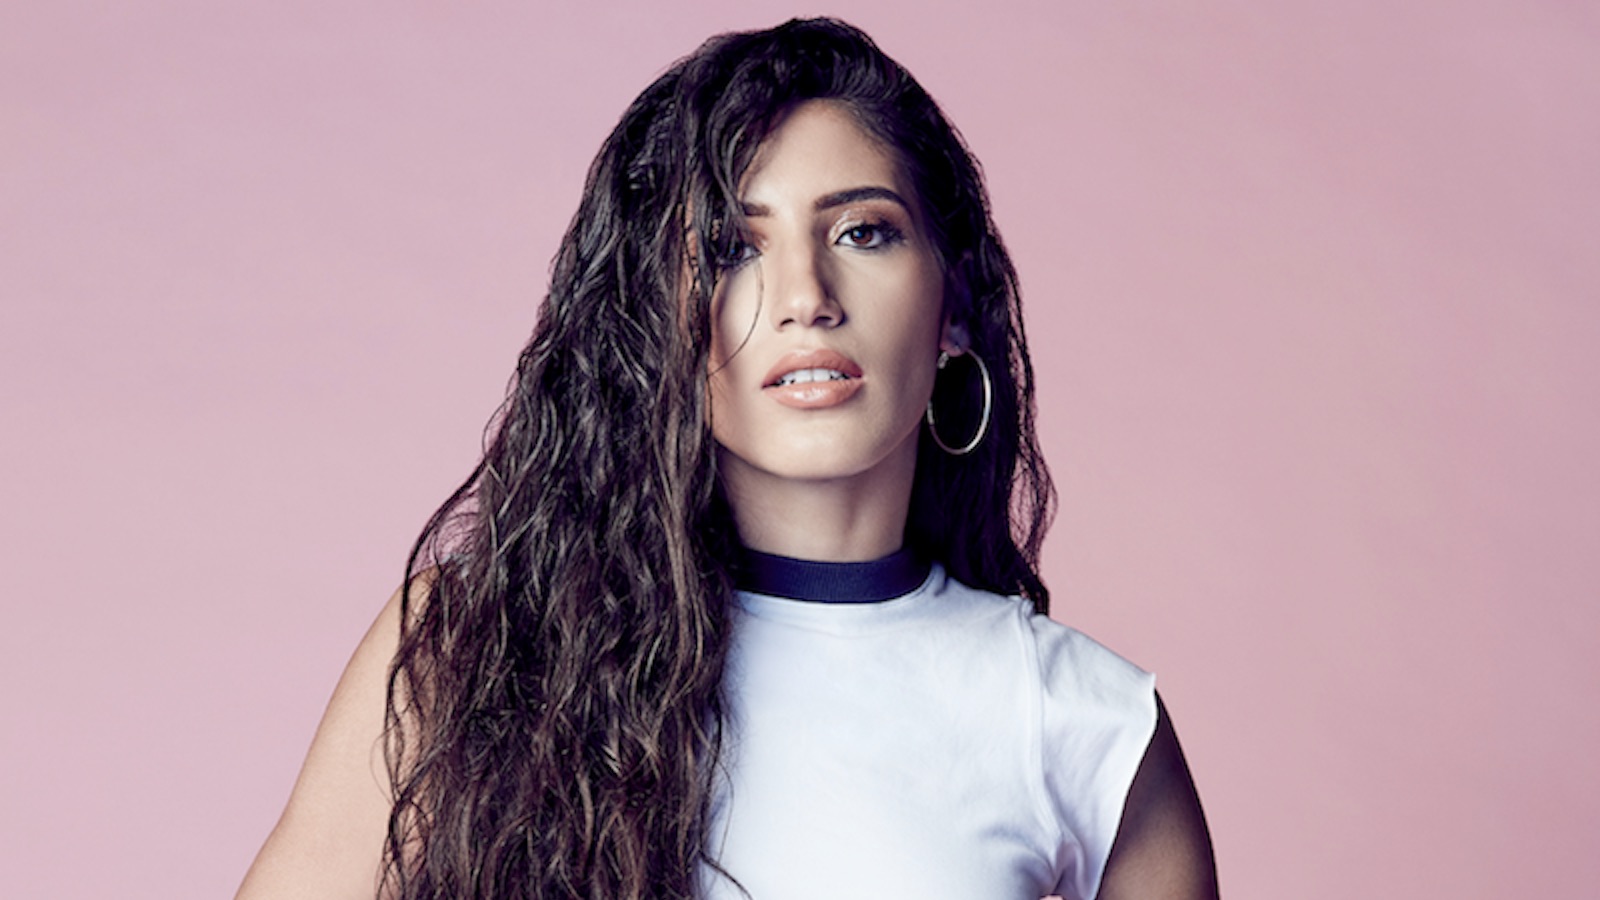 Singer ABIR is going to be your new favorite girl-anthem artist